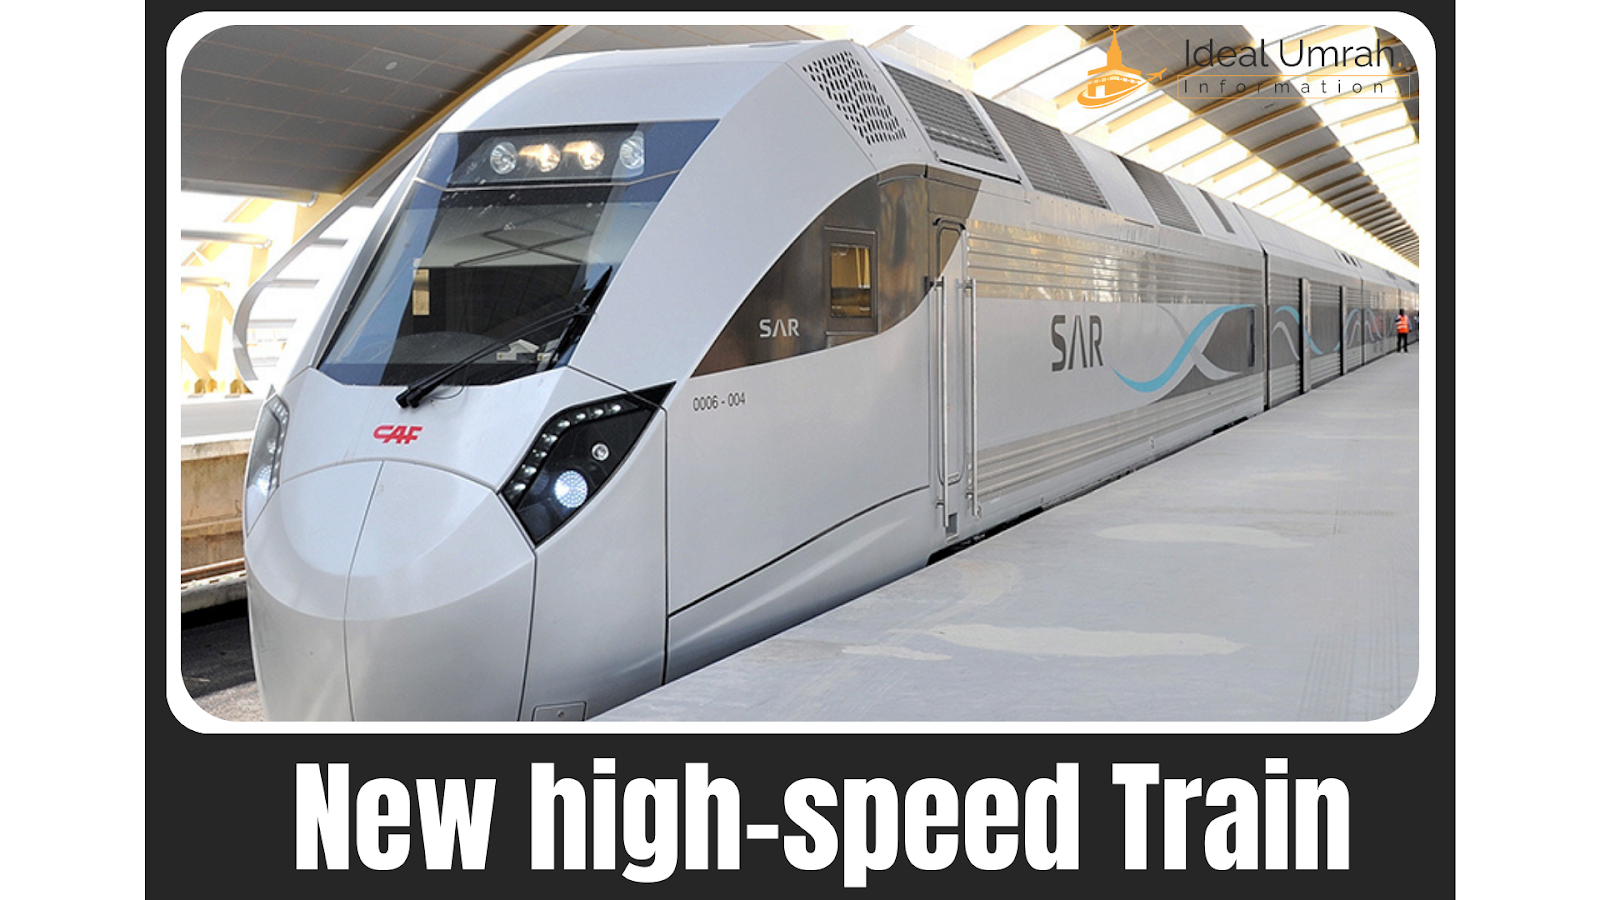 high speed train for umrah